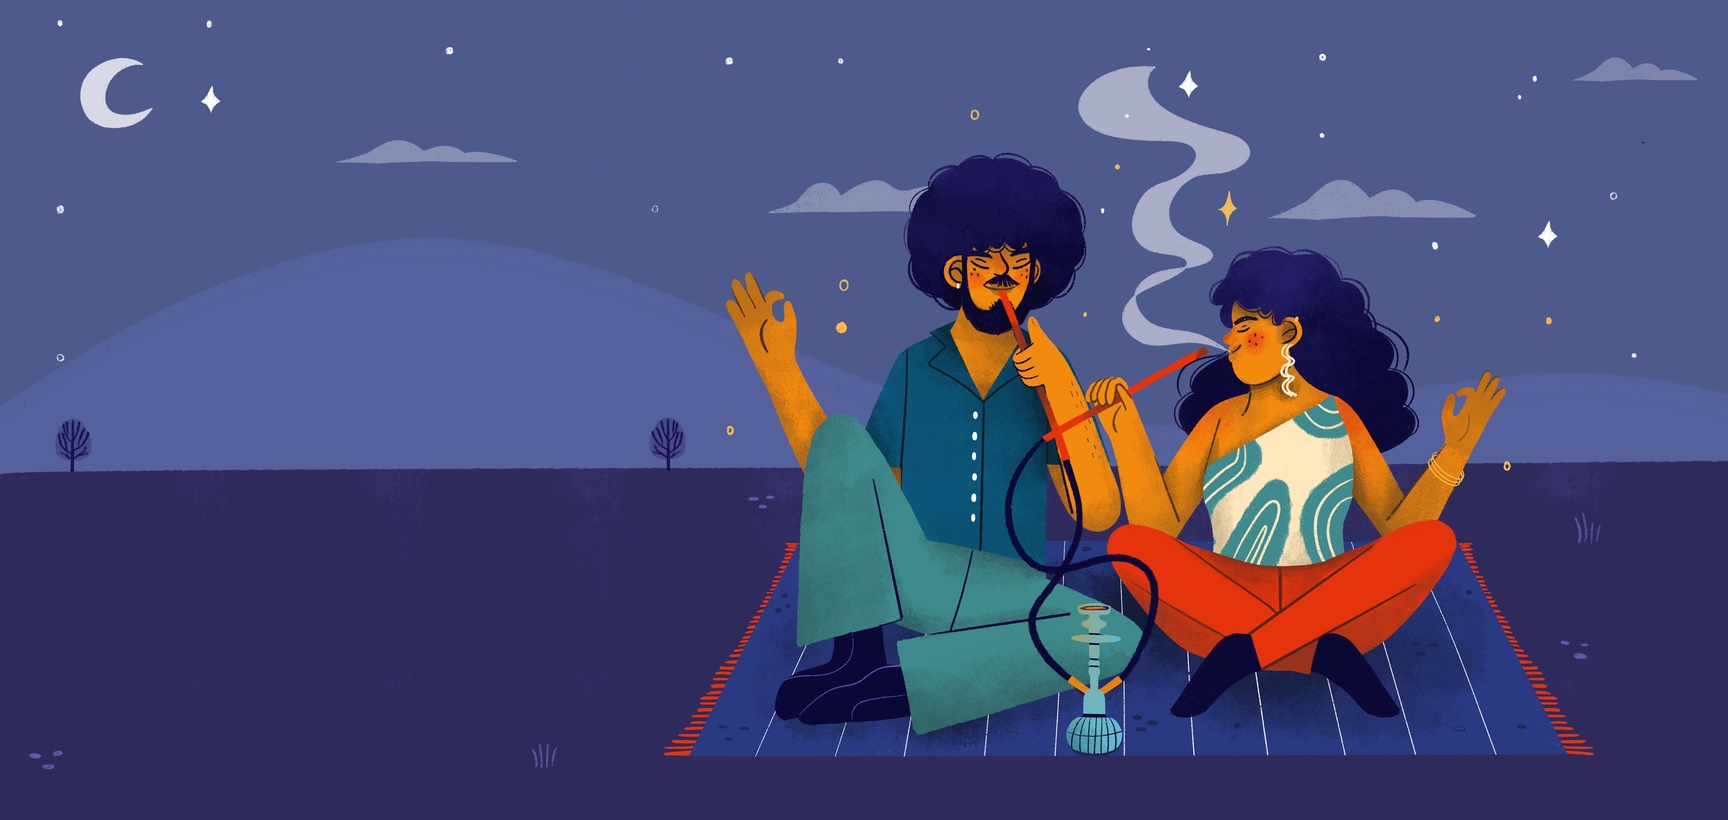 Hippie vibe illustration of a couple smoking hookah on a starry night.